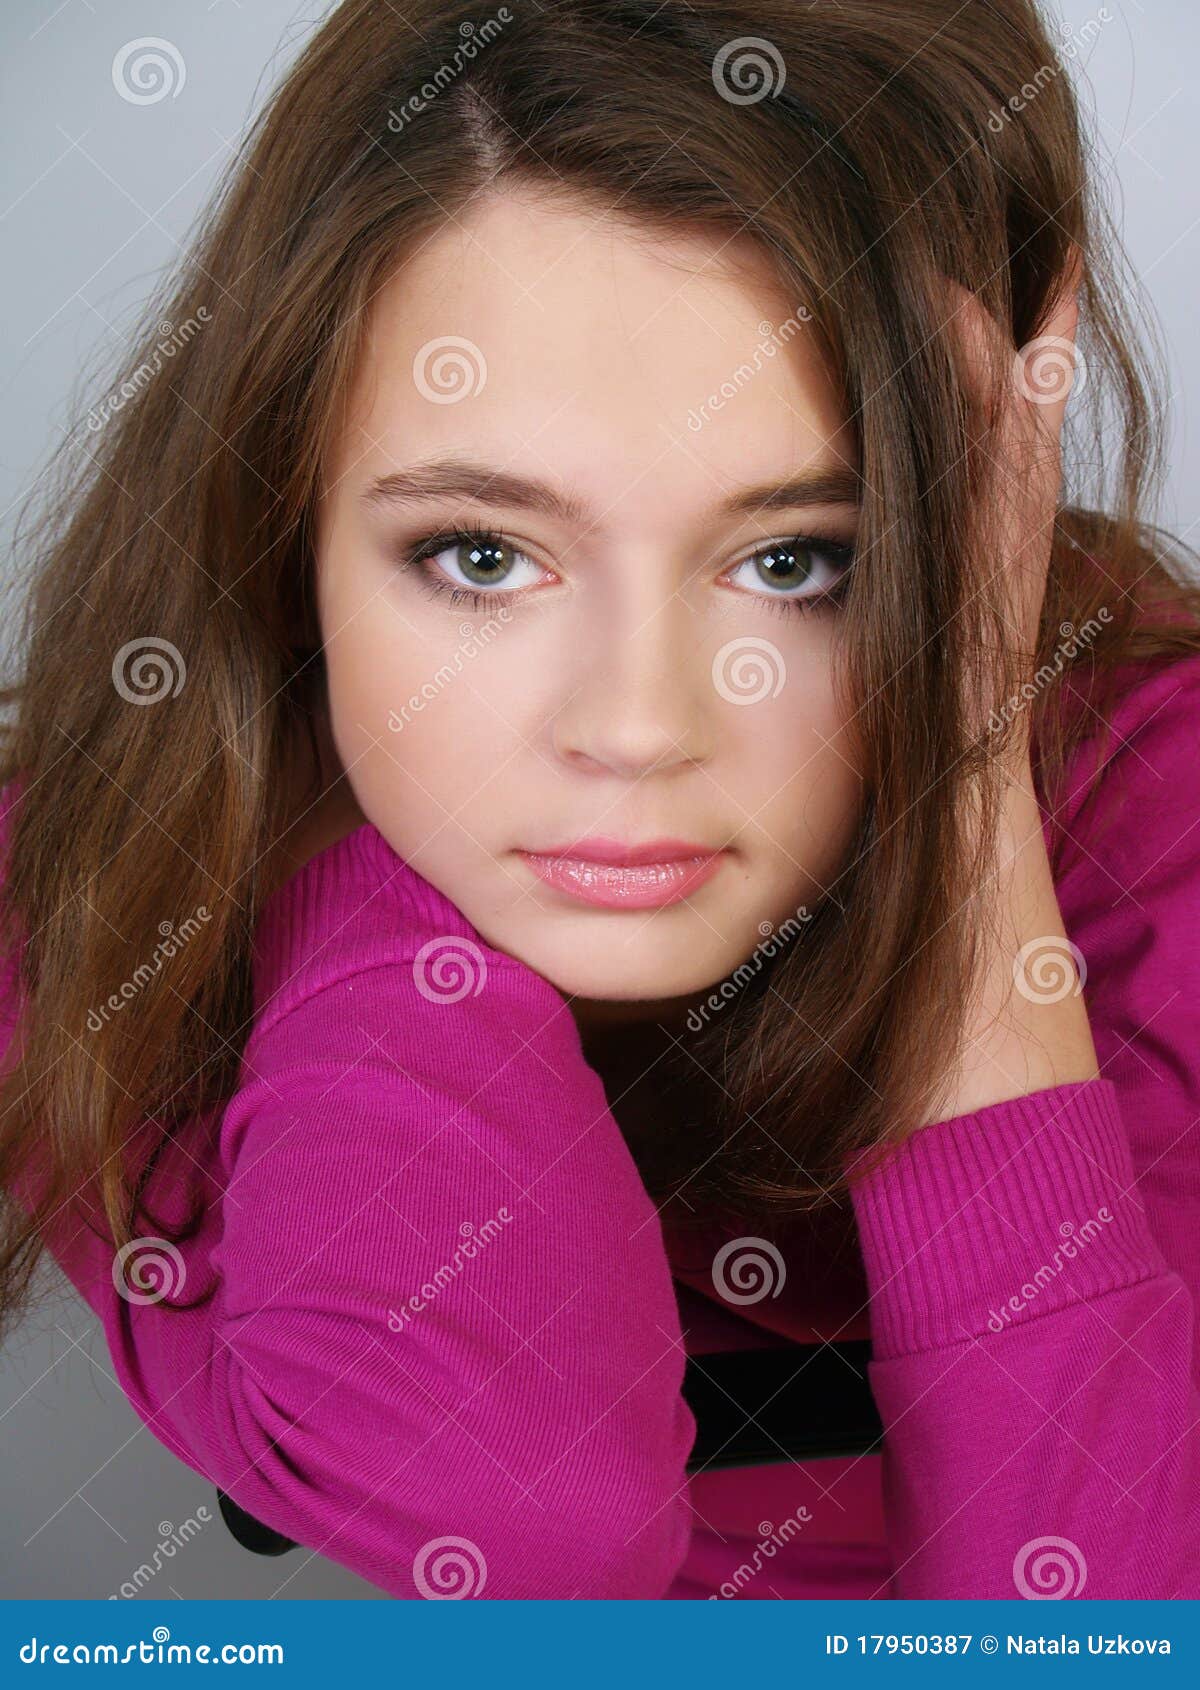 Portrait of the Beautiful Girl of the Teenager Stock Image - Image of ...